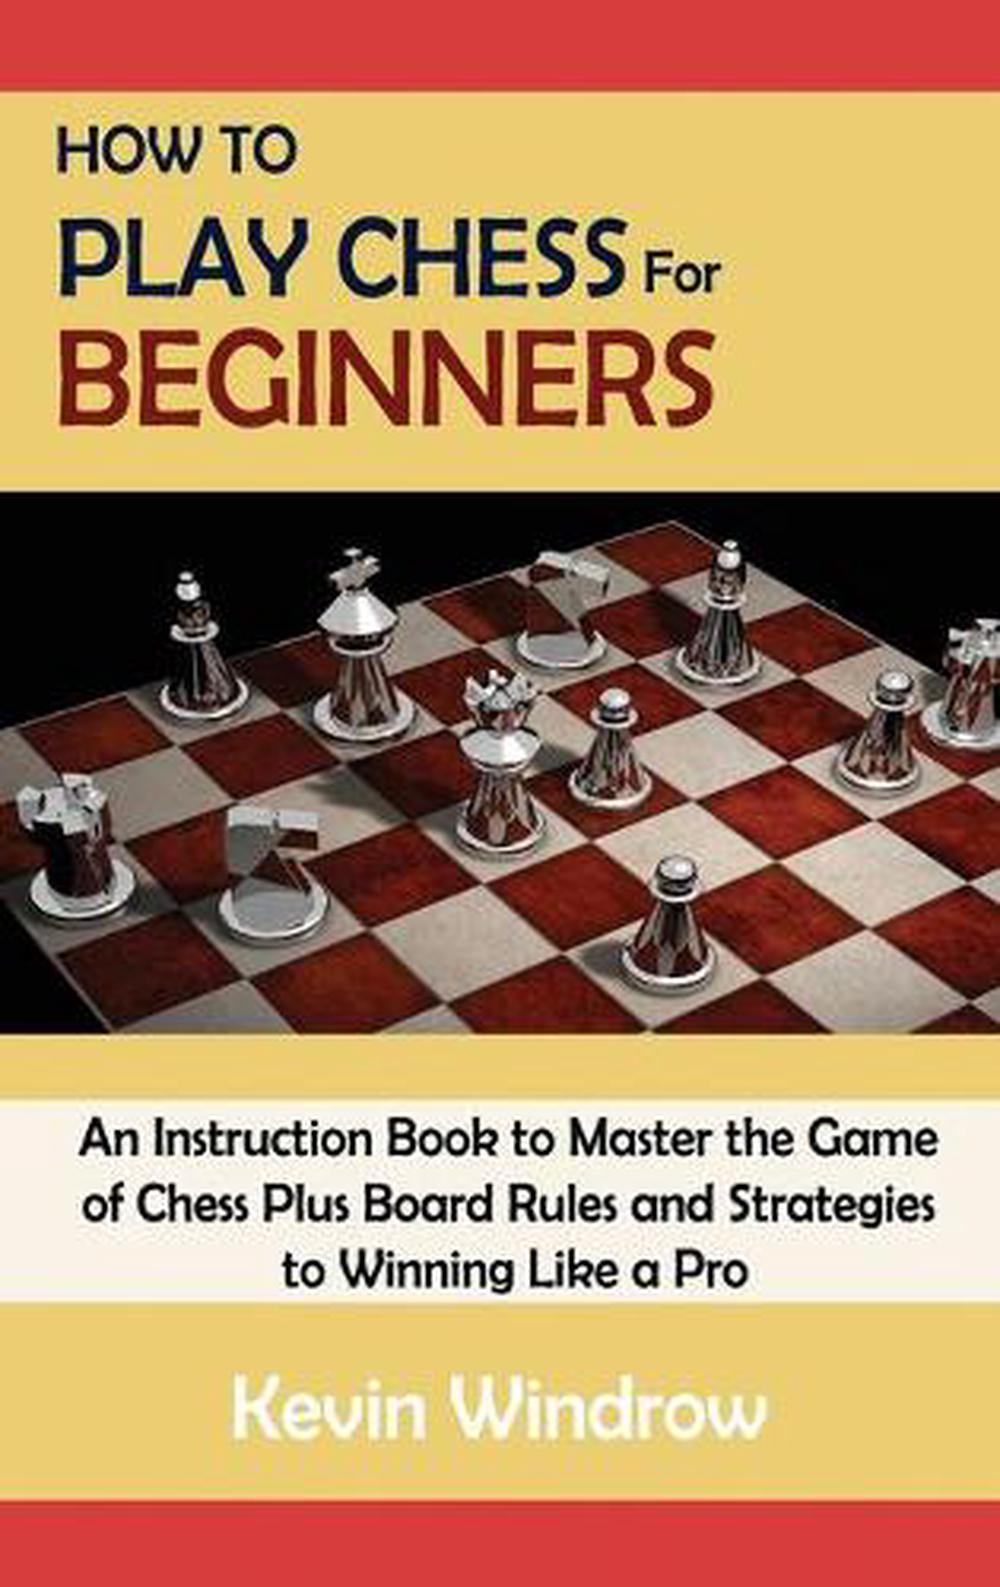 How To Play Chess For Beginners An Instruction Book To Master The Game Of Chess Plus Board Rules And Strategies To Winning Like A Pro By Kevin Windrow Hardcover Buy